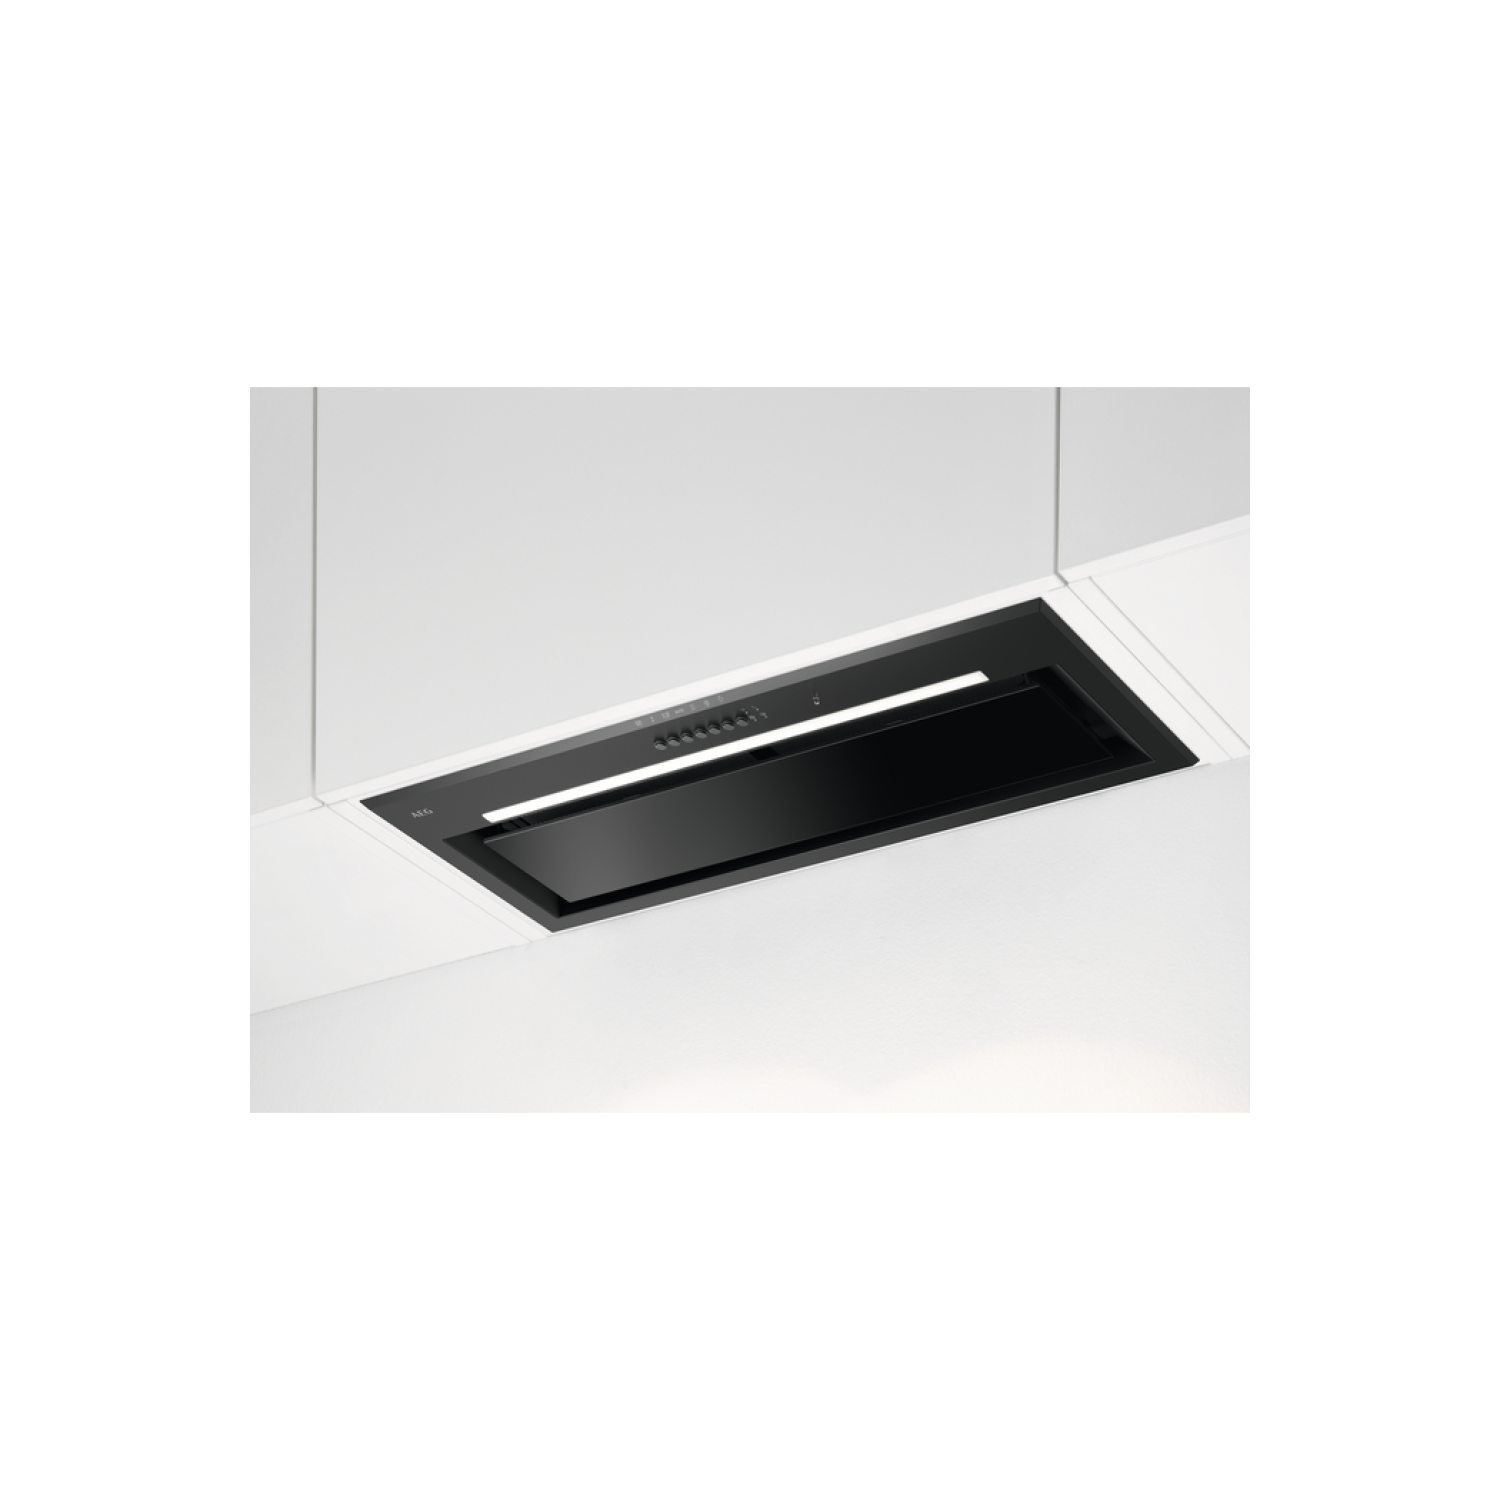 Photos - Other for Computer AEG 9000 AutoSense Series 90cm Canopy Cooker Hood - Black GDG969AB 